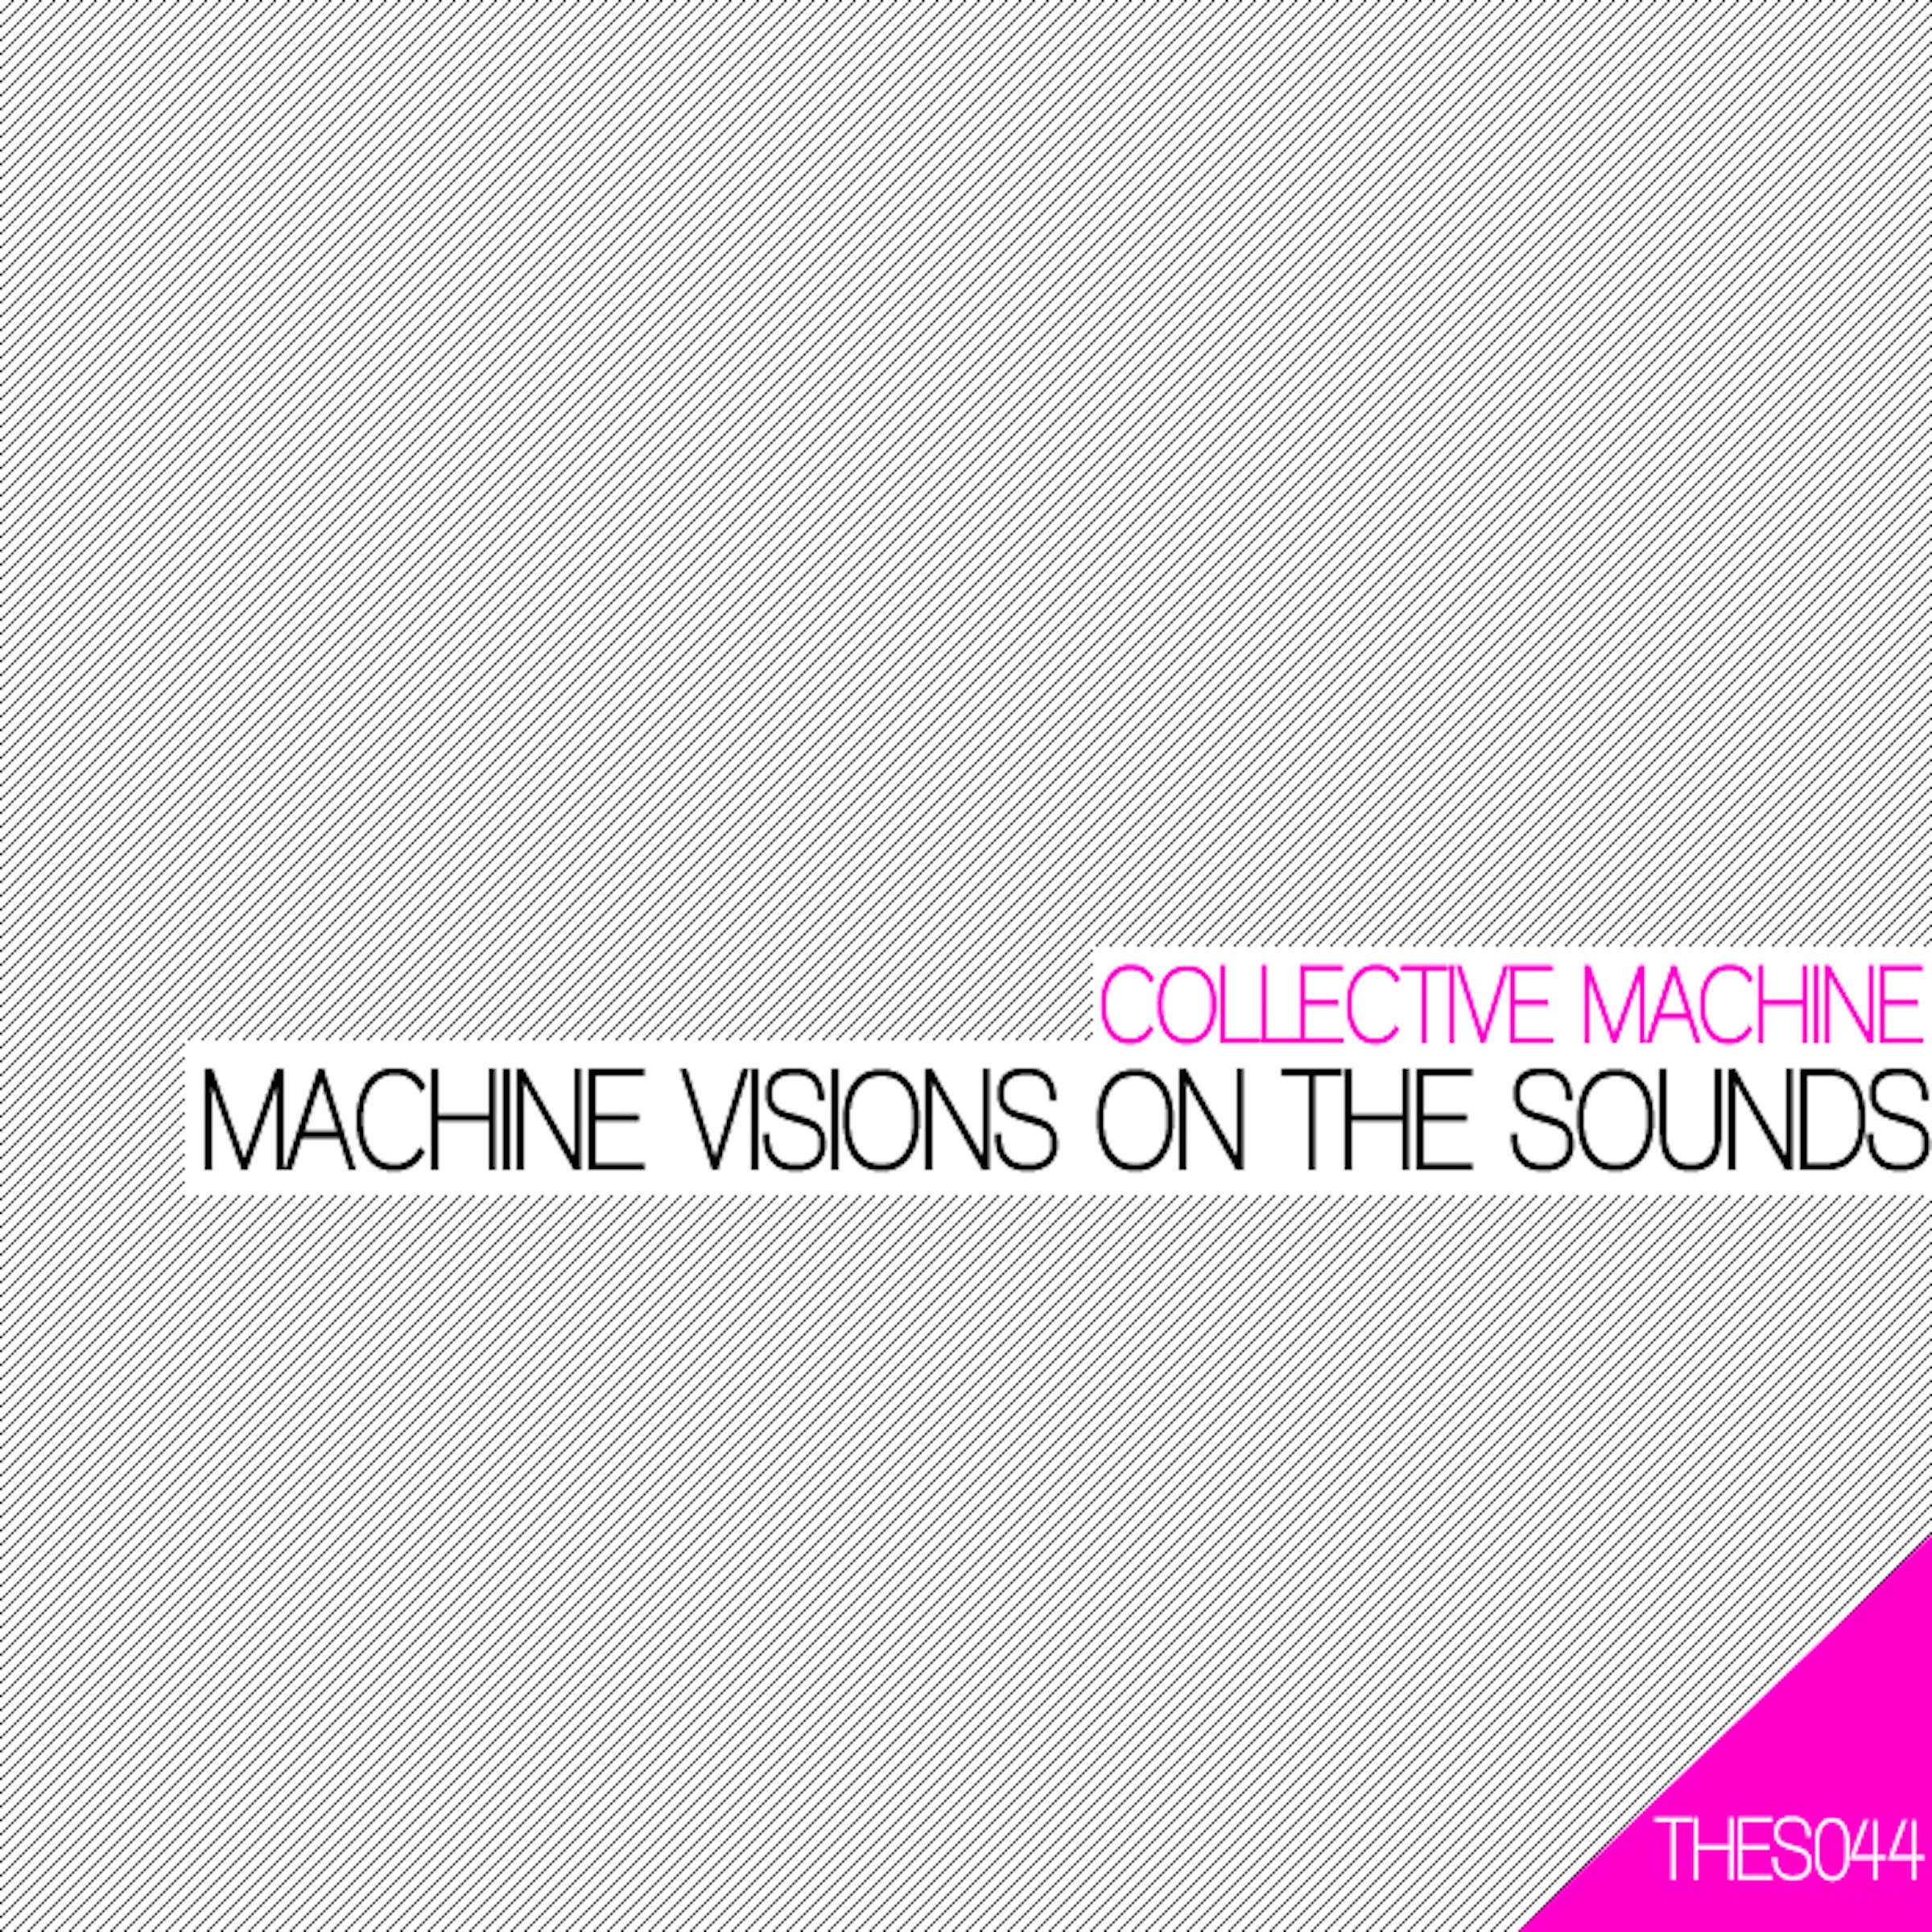 Machine Visions On the Sounds